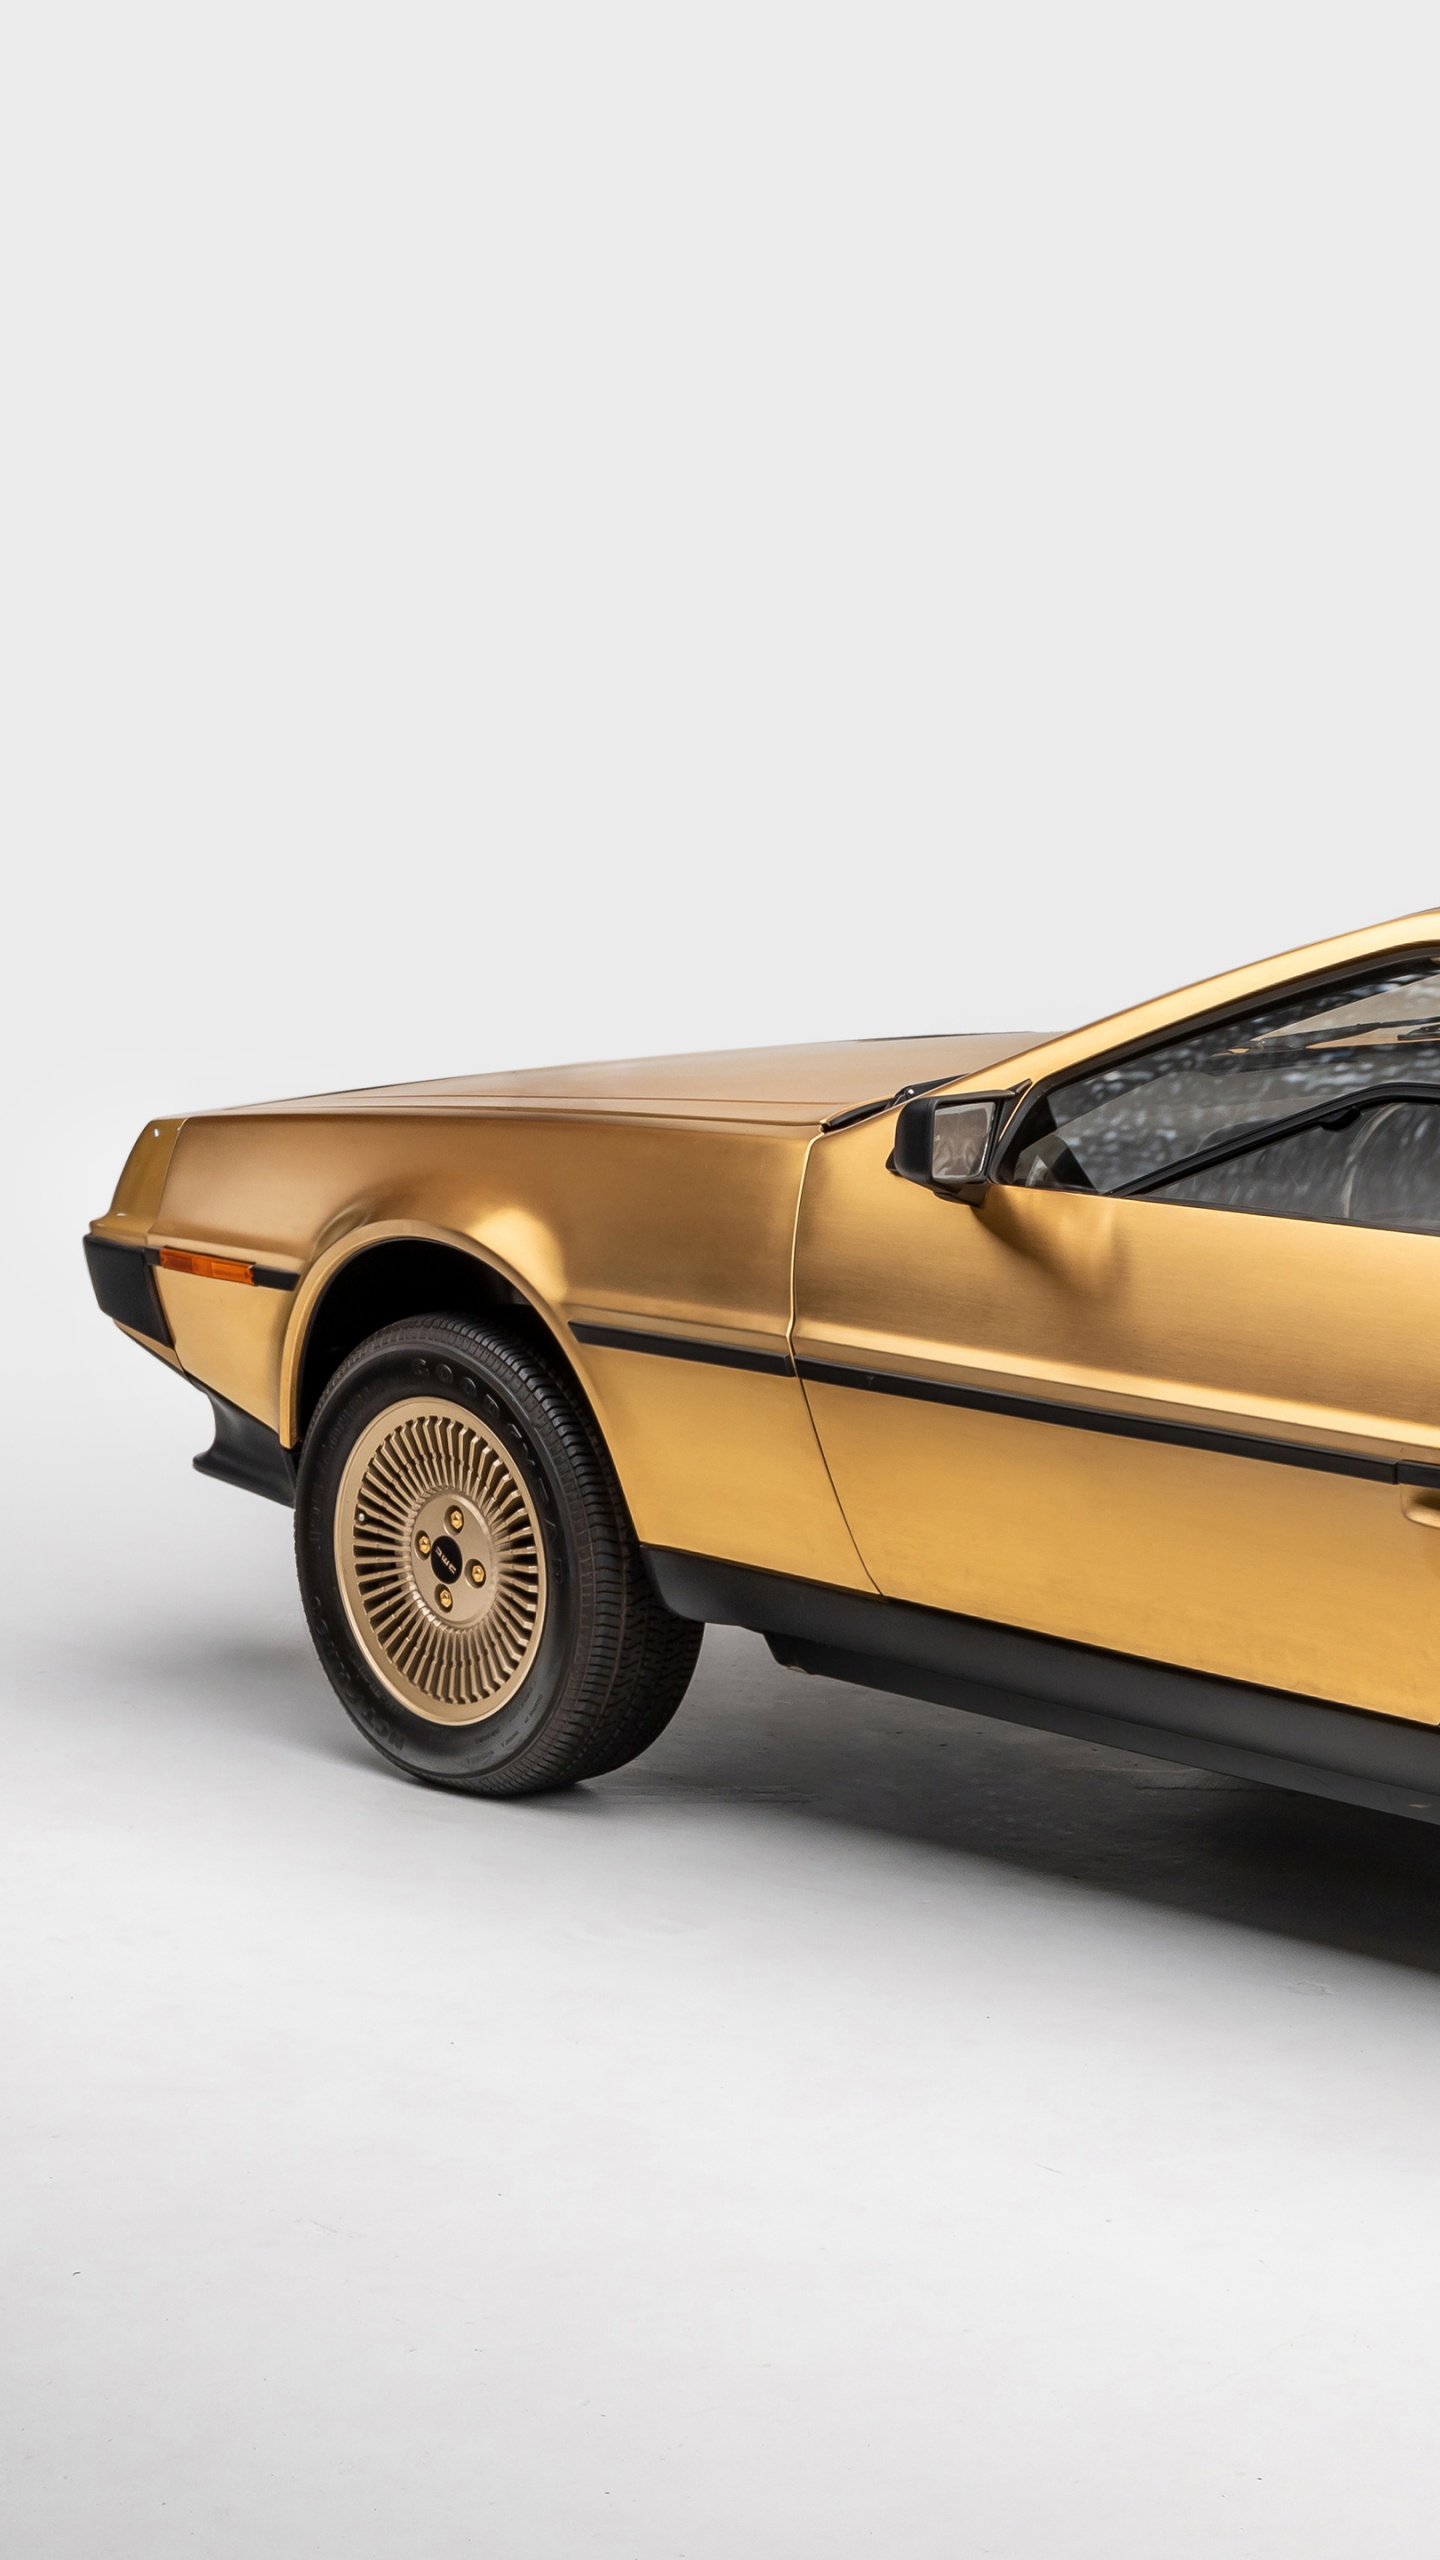 Delorean Dmc 12, DMC DeLorean, DeLorean, DeLorean Motor Company, Roue. Wallpaper in 1440x2560 Resolution